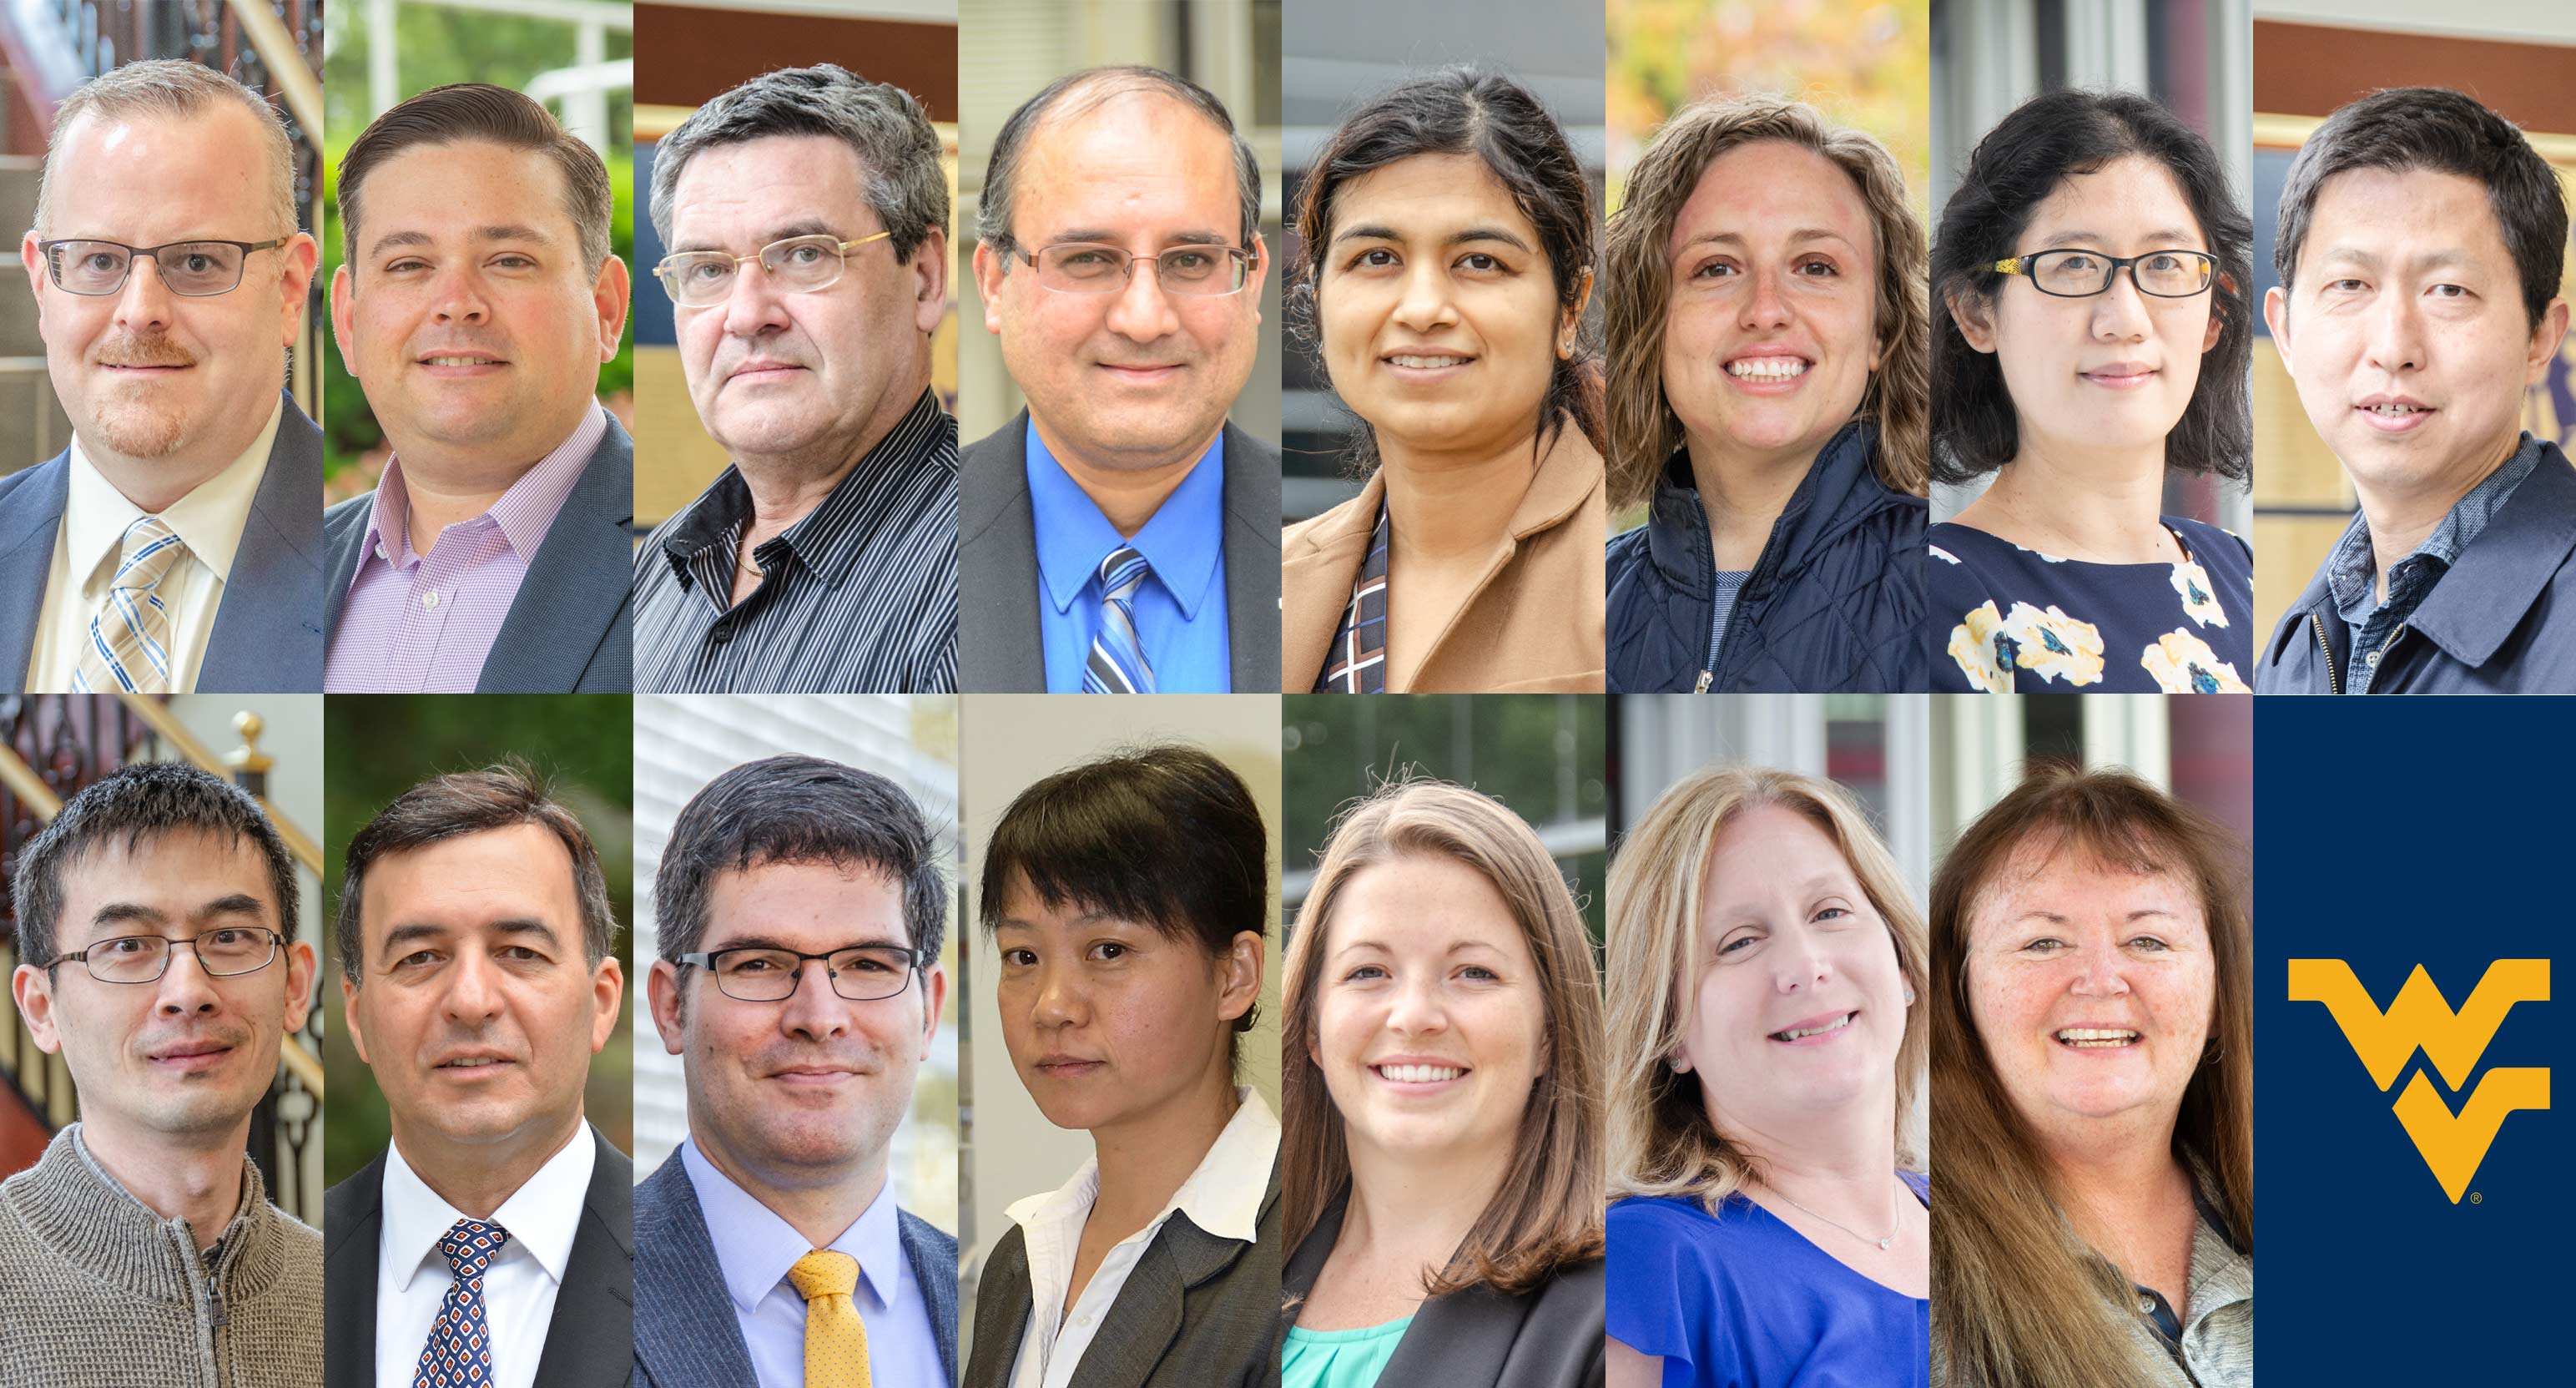 Recipients of the 2021-2022 academic year teaching, advising, research and staff awards (from left to right, top row) Jeremy Dawson, Christopher Griffin, Mario Perhinschi, Udaya Halabe, Sarika Solanki, Lauren Stein, Xin Li and Yu Gu (from left to right, bottom row) Xin Li, Nasser Nasrabadi, Thorsten Wuest, Xueyan Song, Emily Garner, Kathleen Cullen and Susie Huggins.<em></em>